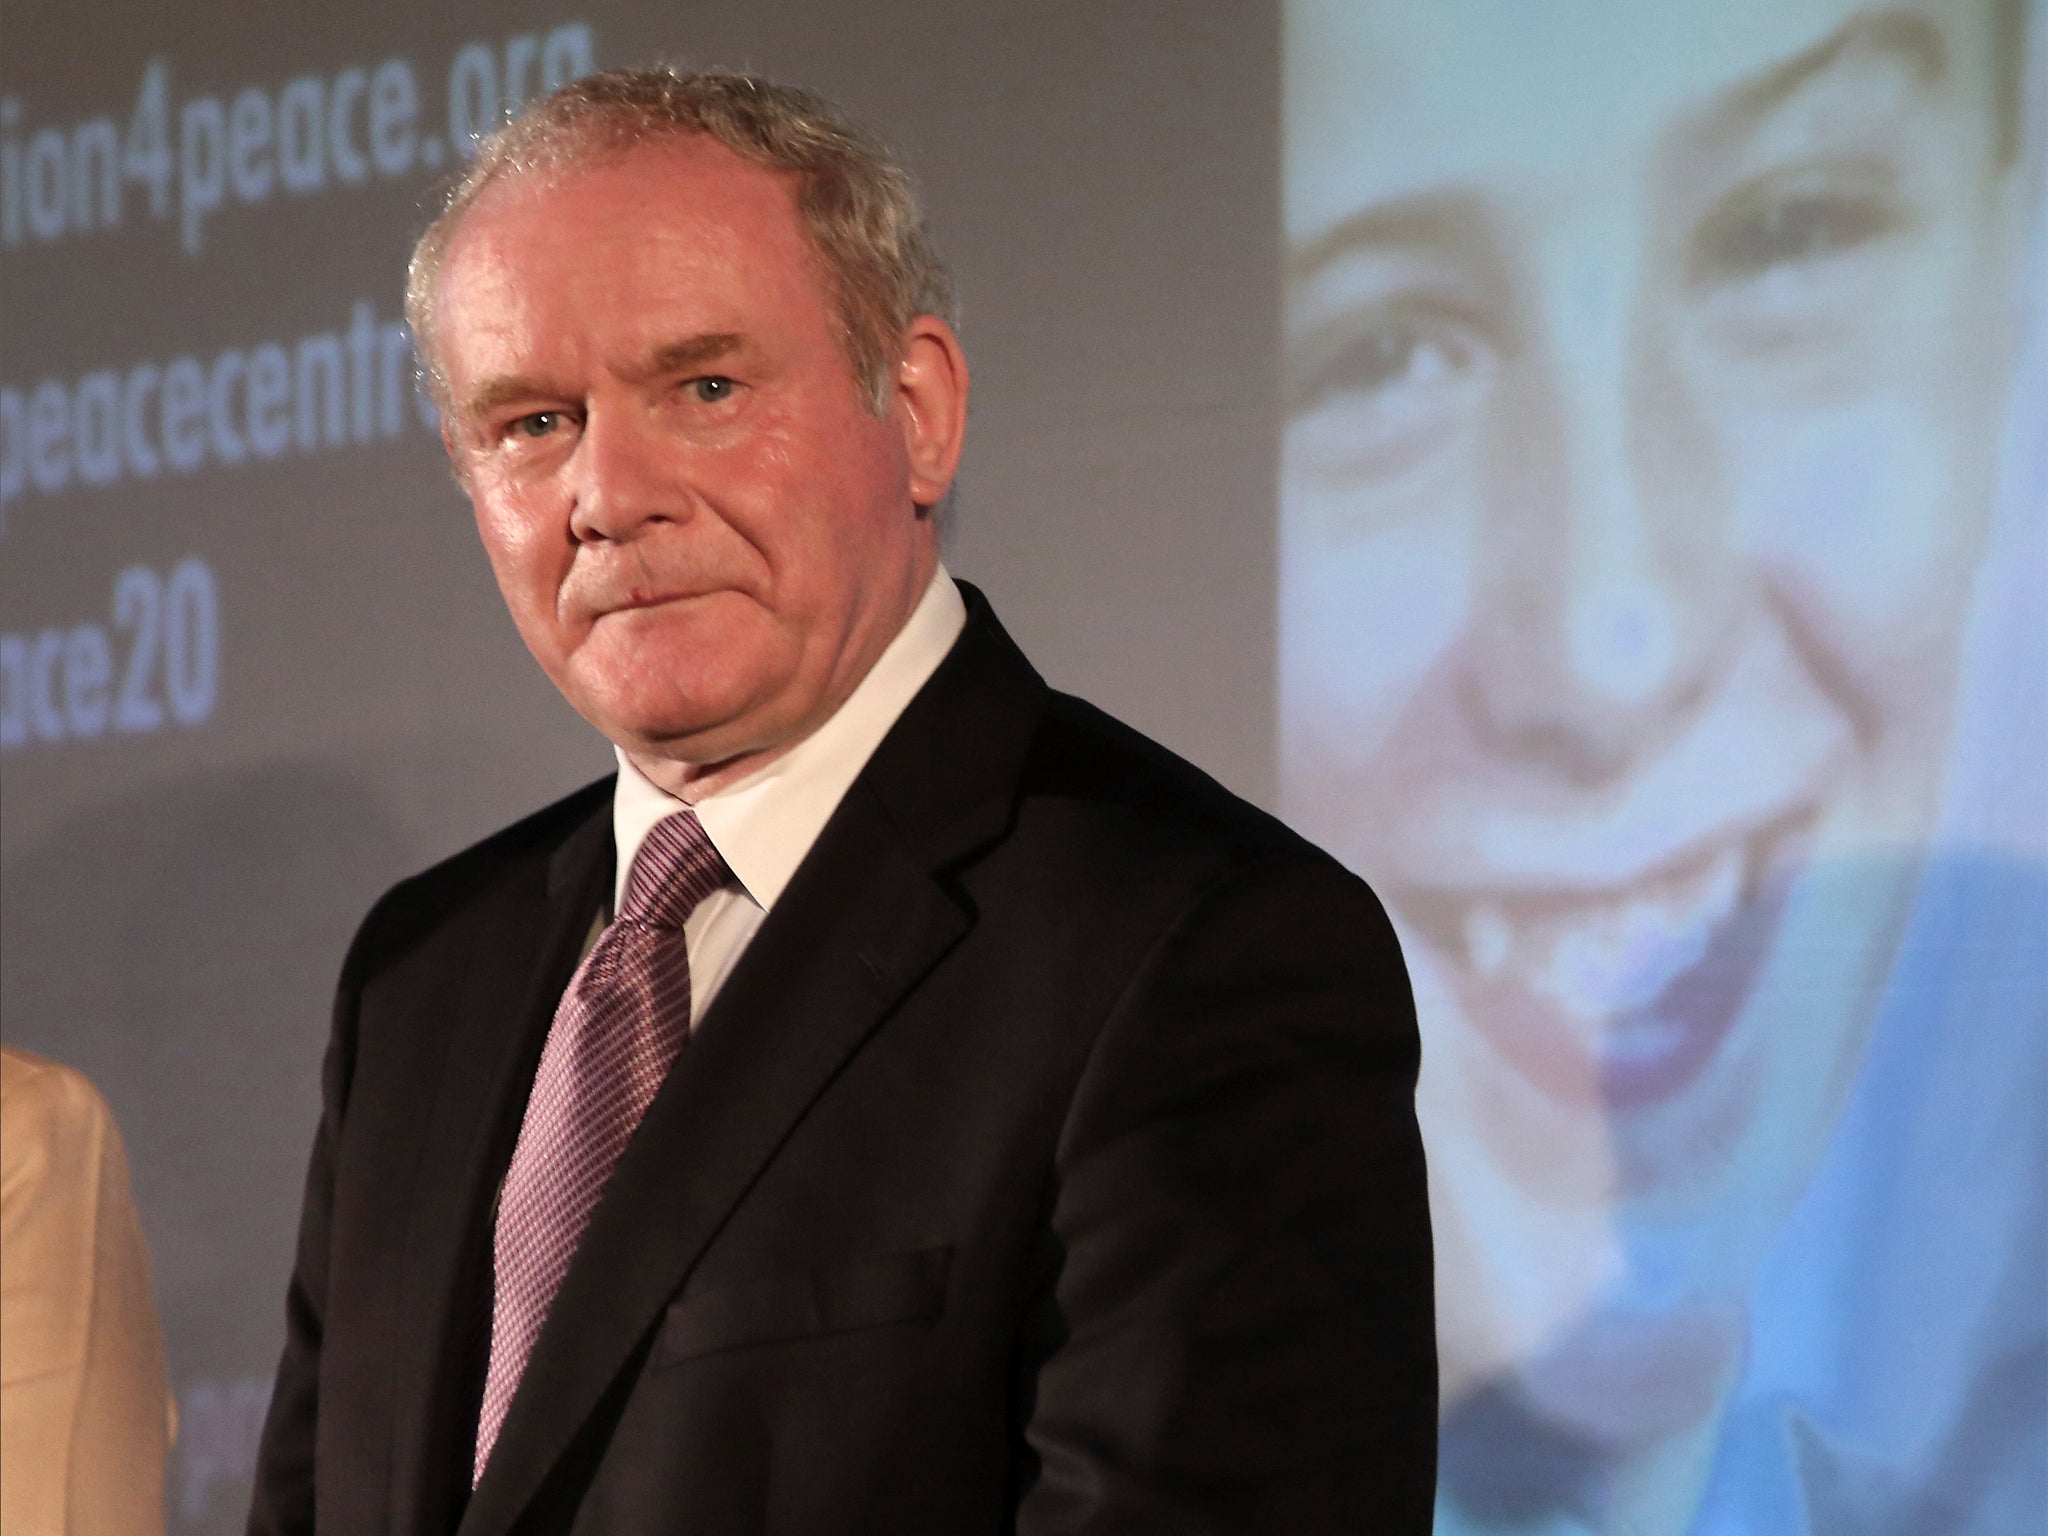 Martin McGuinness stands in front of a projected image of bombing victim Tim Parry, during the press conference in Warrington